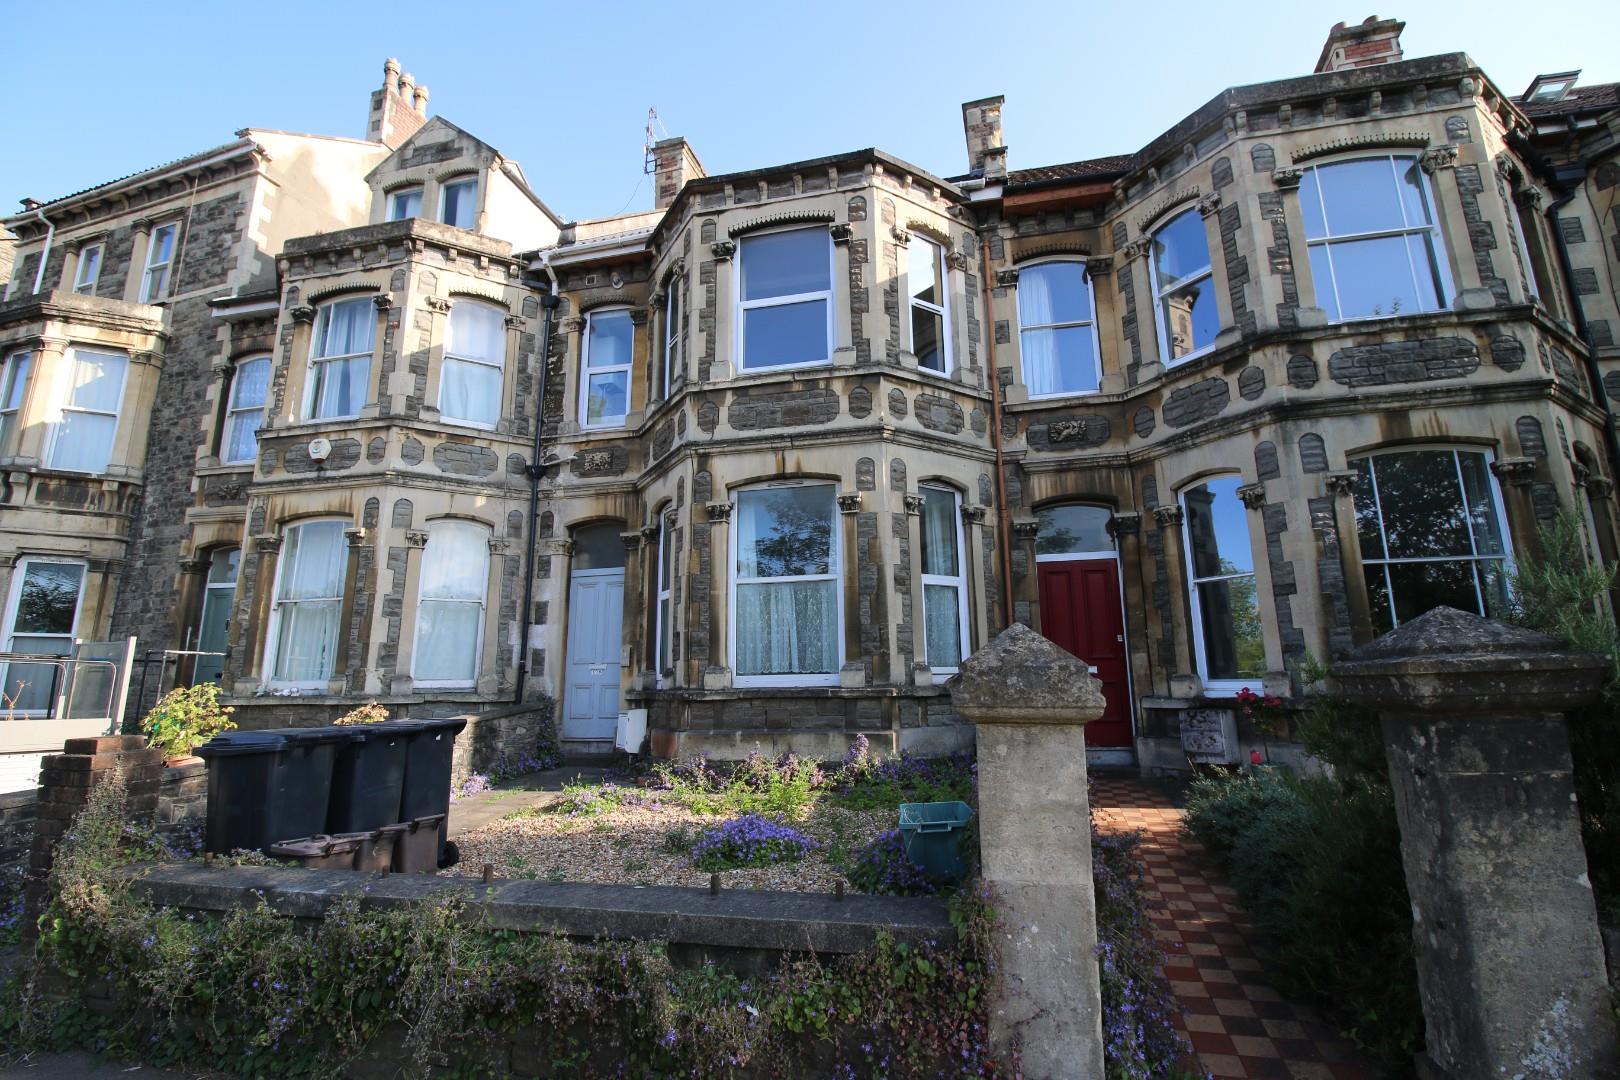 Investment property providing three self-contained flats on Coronation Road, Southville